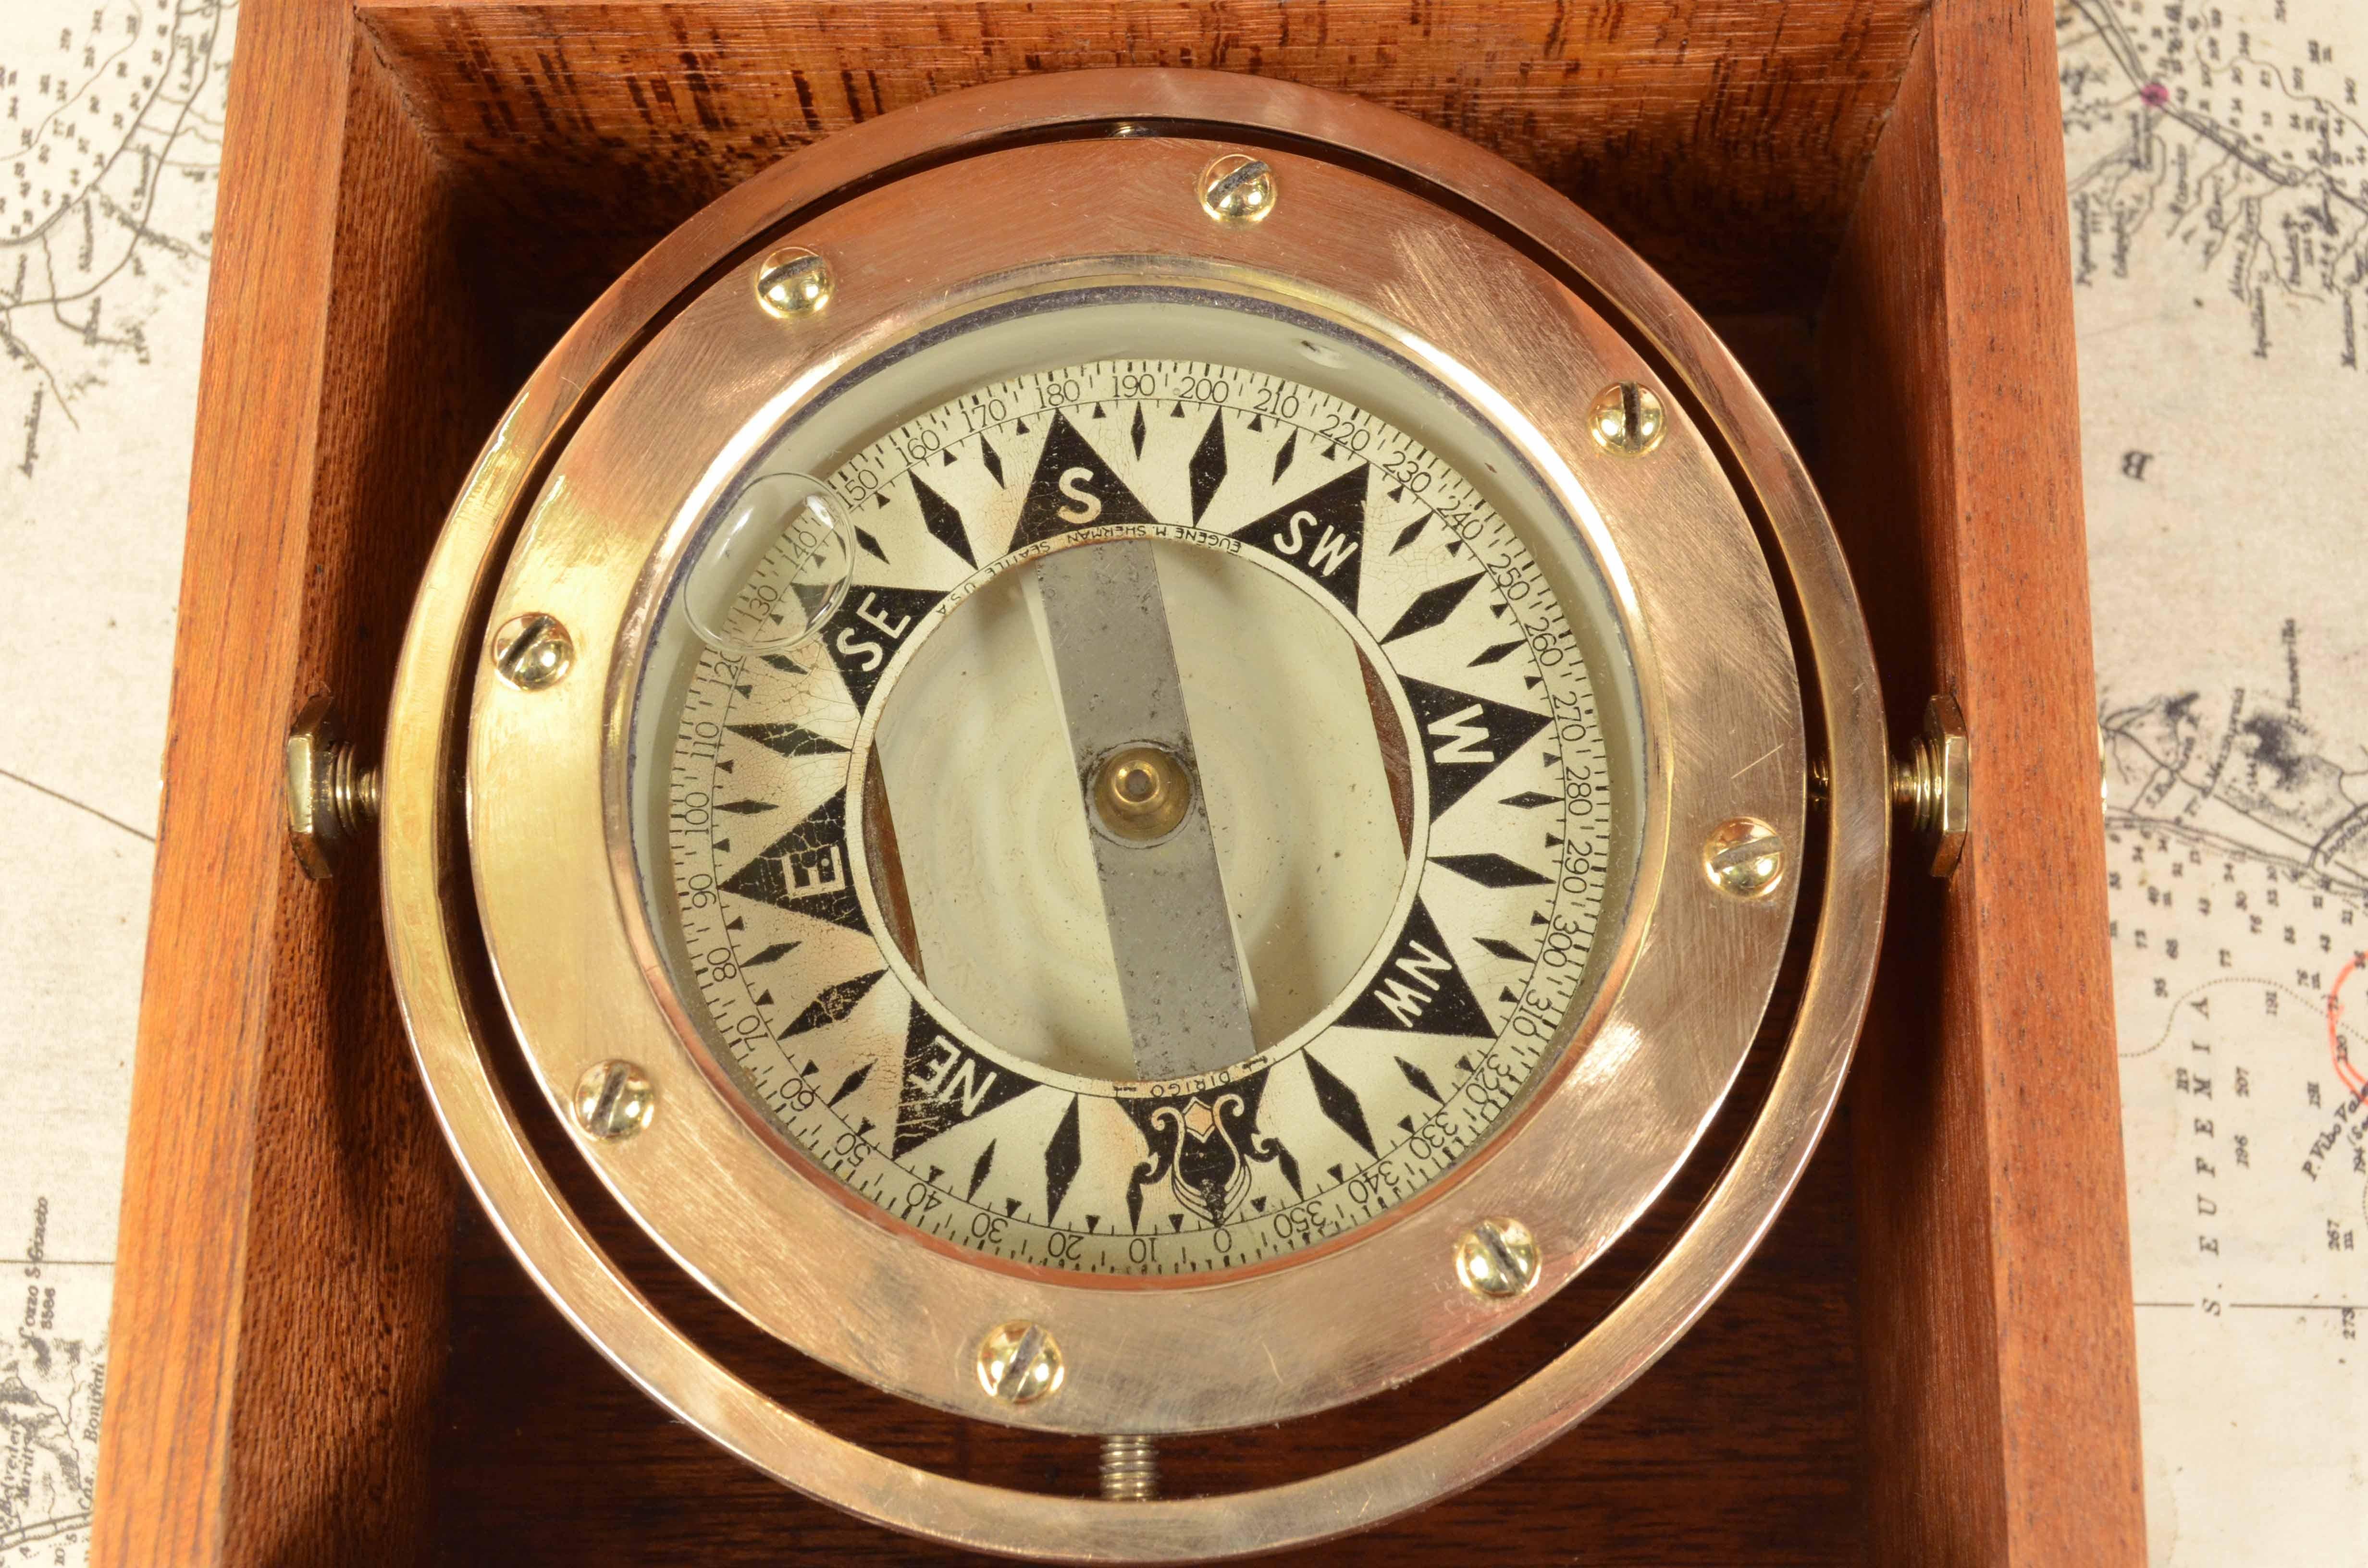 Liquid antique nautical compass on universal joint signed DIRIGO Eugen M. Sherman Seattle USA from the 1920s, in its original oak wood box with brass hinges. Eight wind rose complete with protractor circle.
The compass is made up of a cylindrical